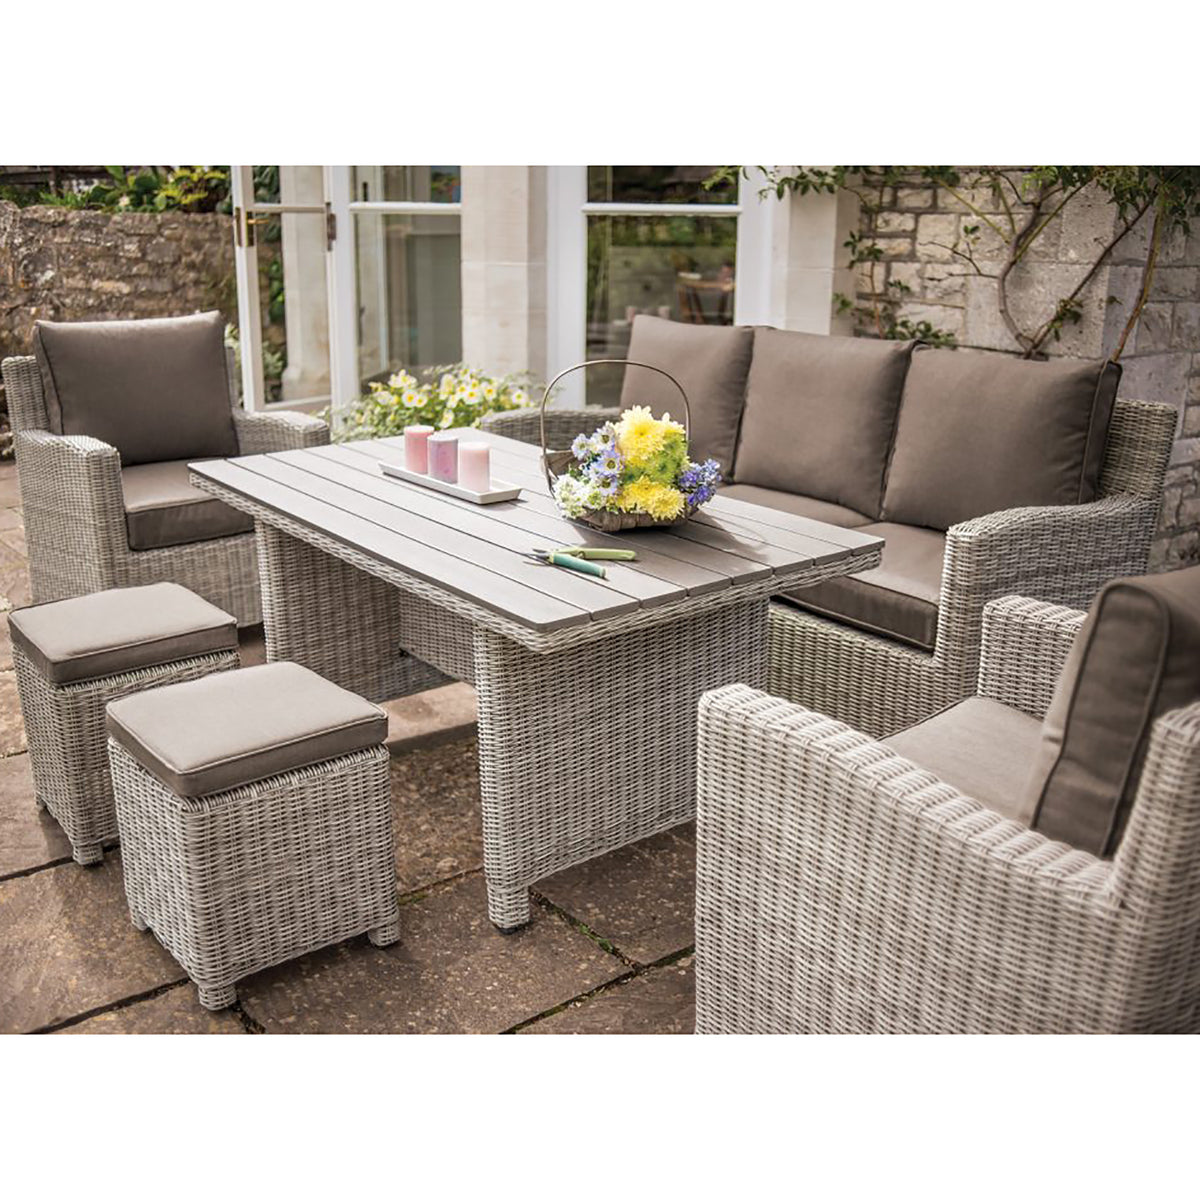 Kettler Palma White Wash Wicker Outdoor Casual Dining Lounge Sofa Set with Slat Top Table